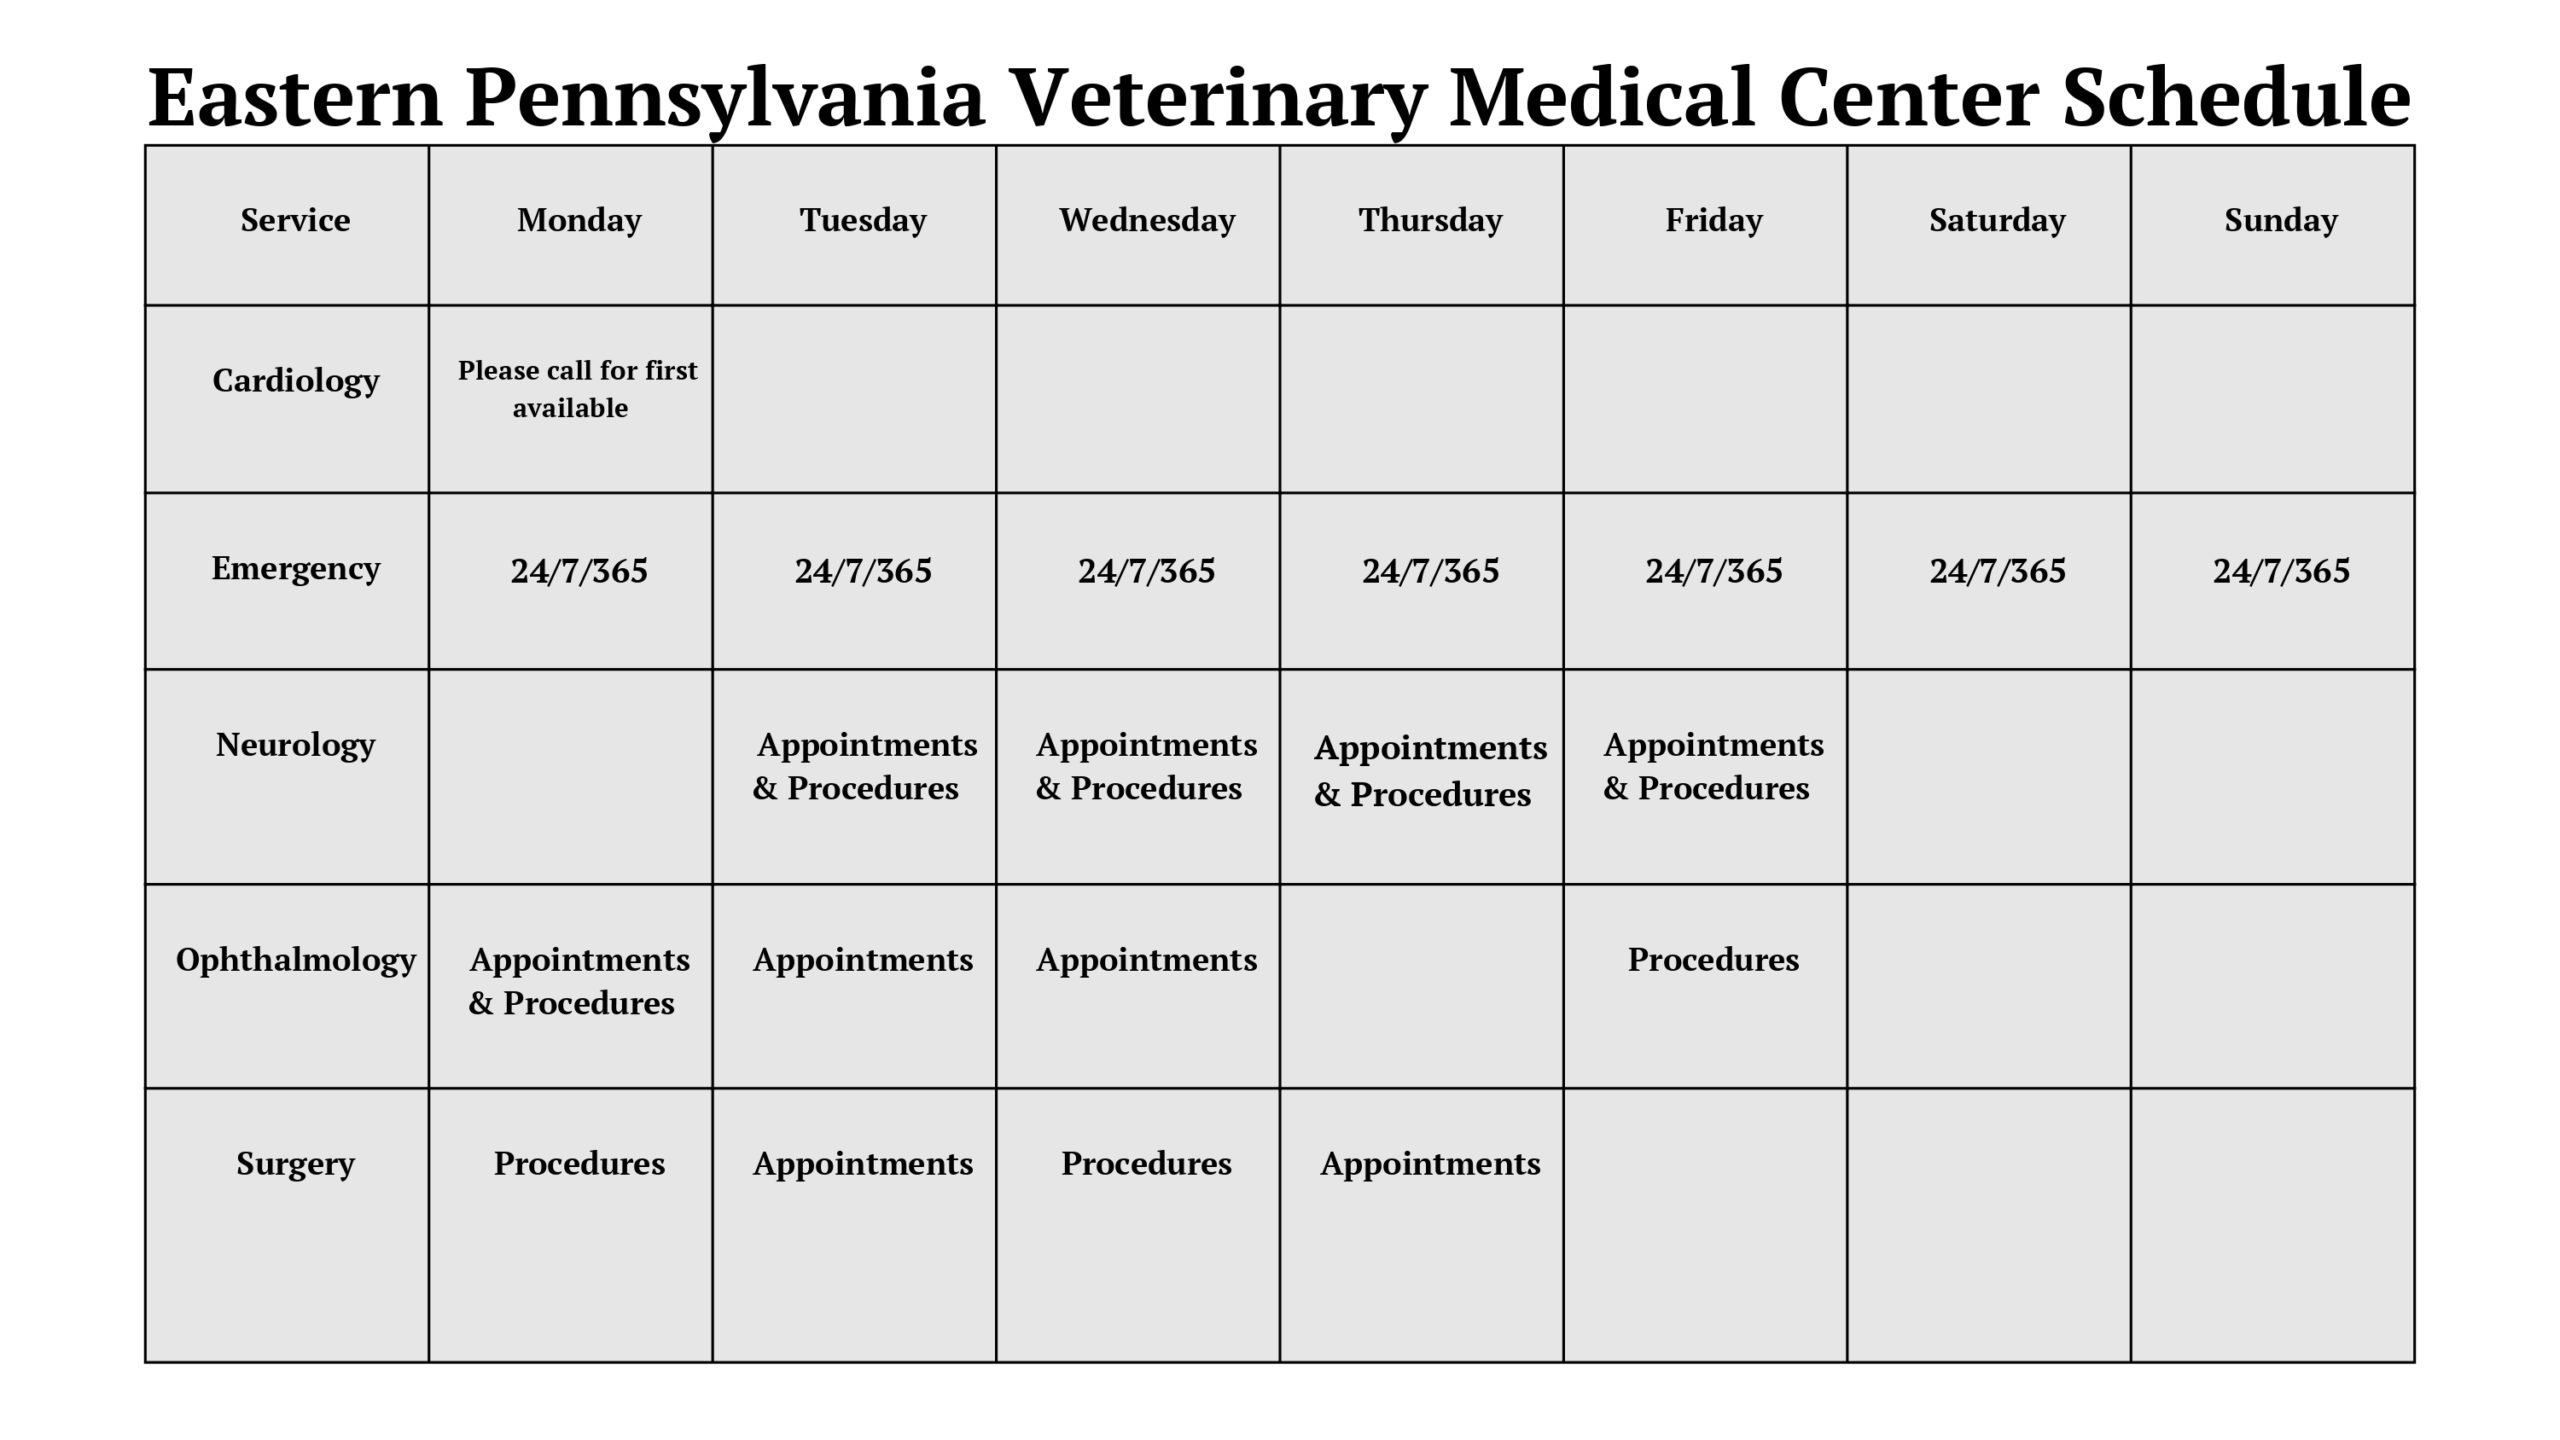 Eastern Pennsylvania Veterinary Medical Center Schedule Presentation Page 0001 Scaled 